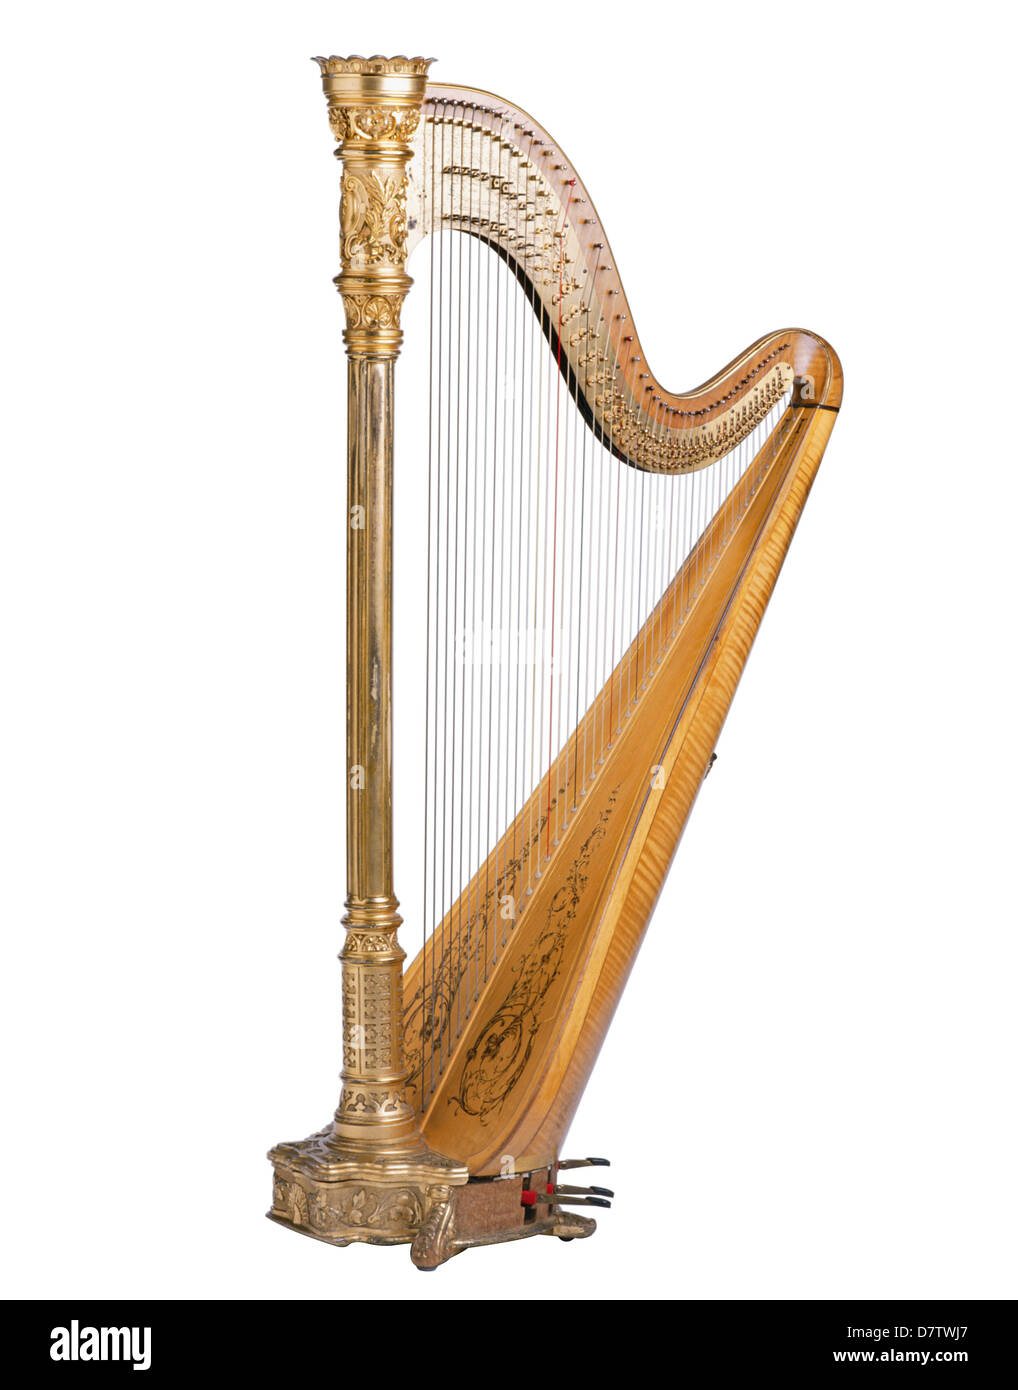 Classical musical instrument harp on a white background Stock Photo